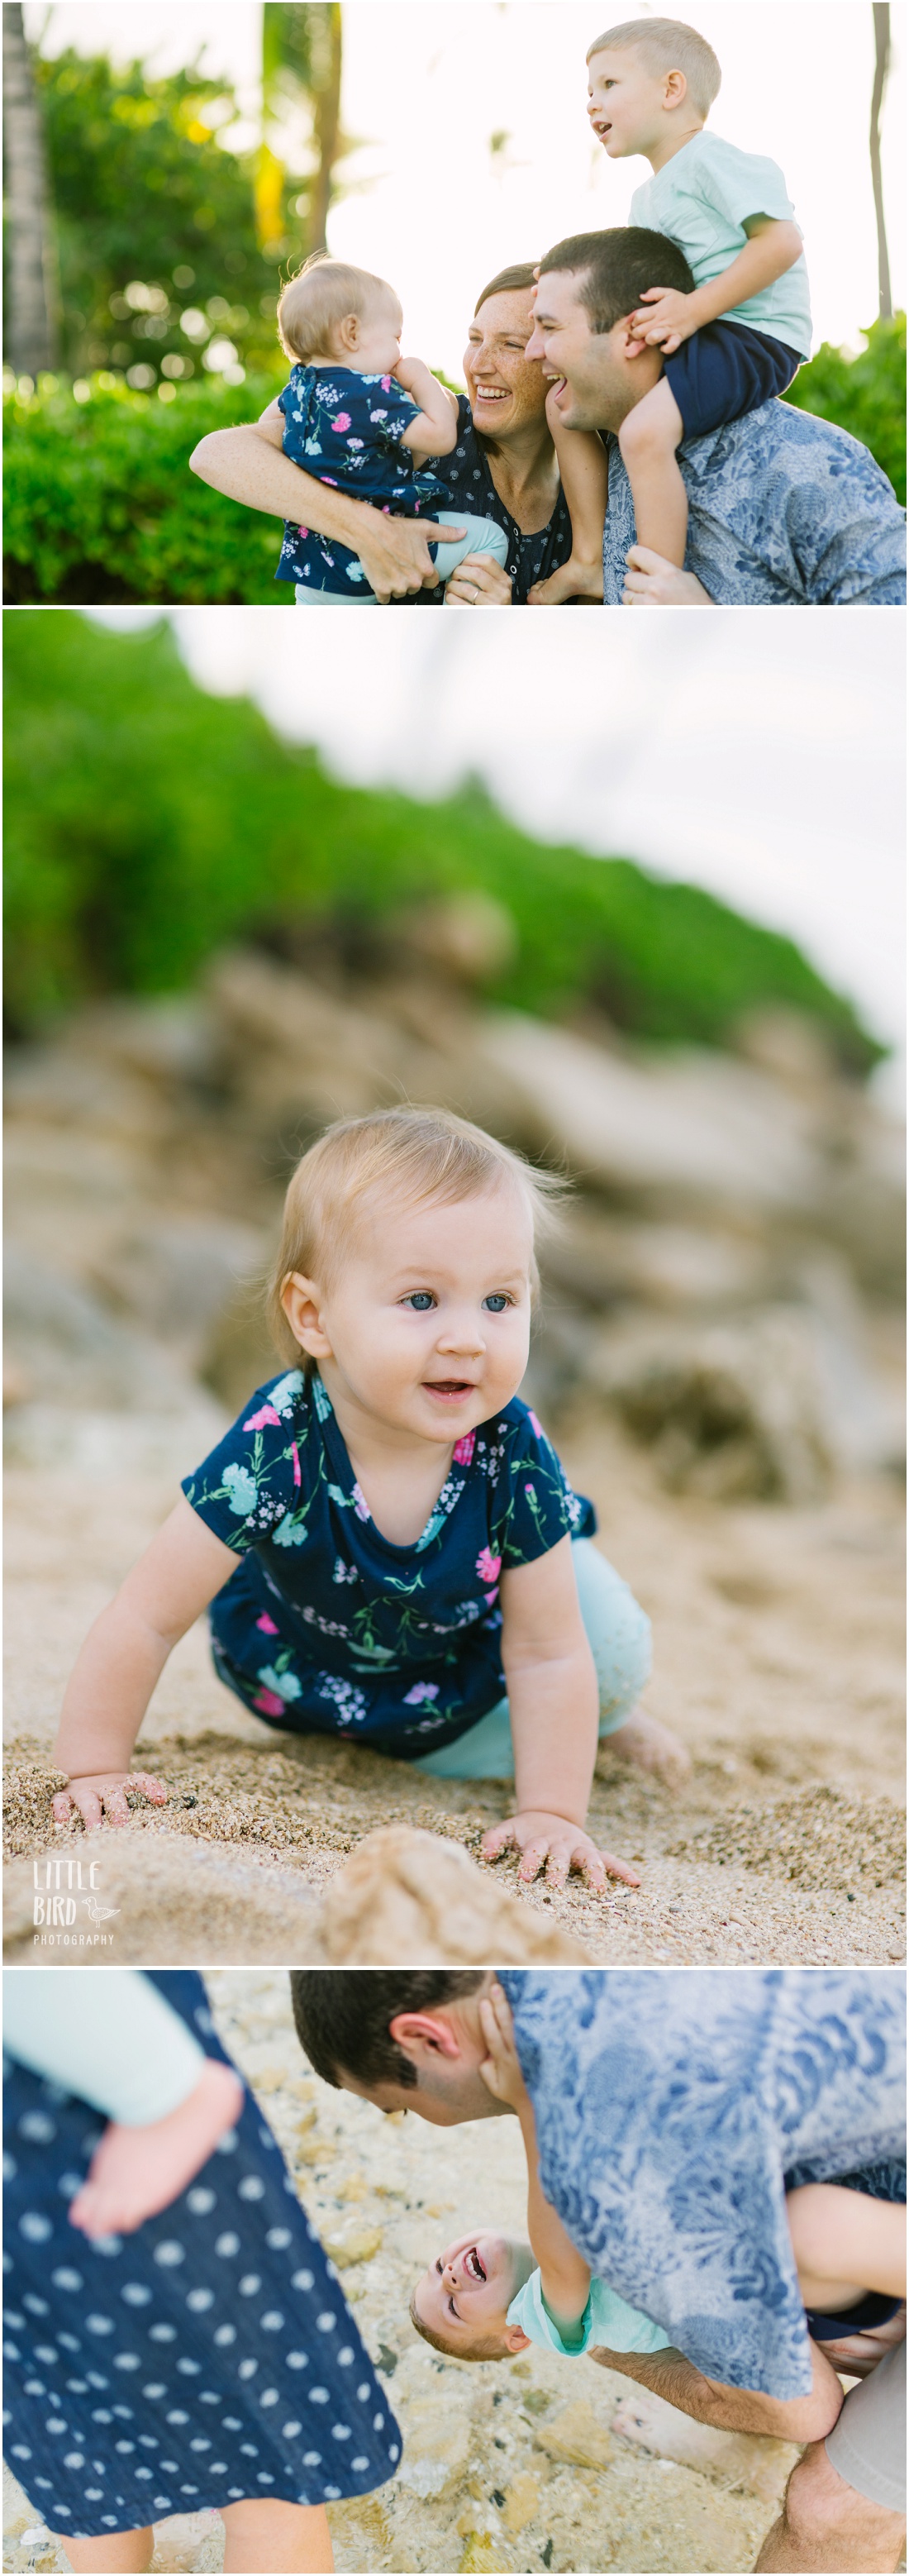 fun lifestyle photography for families in hawaii